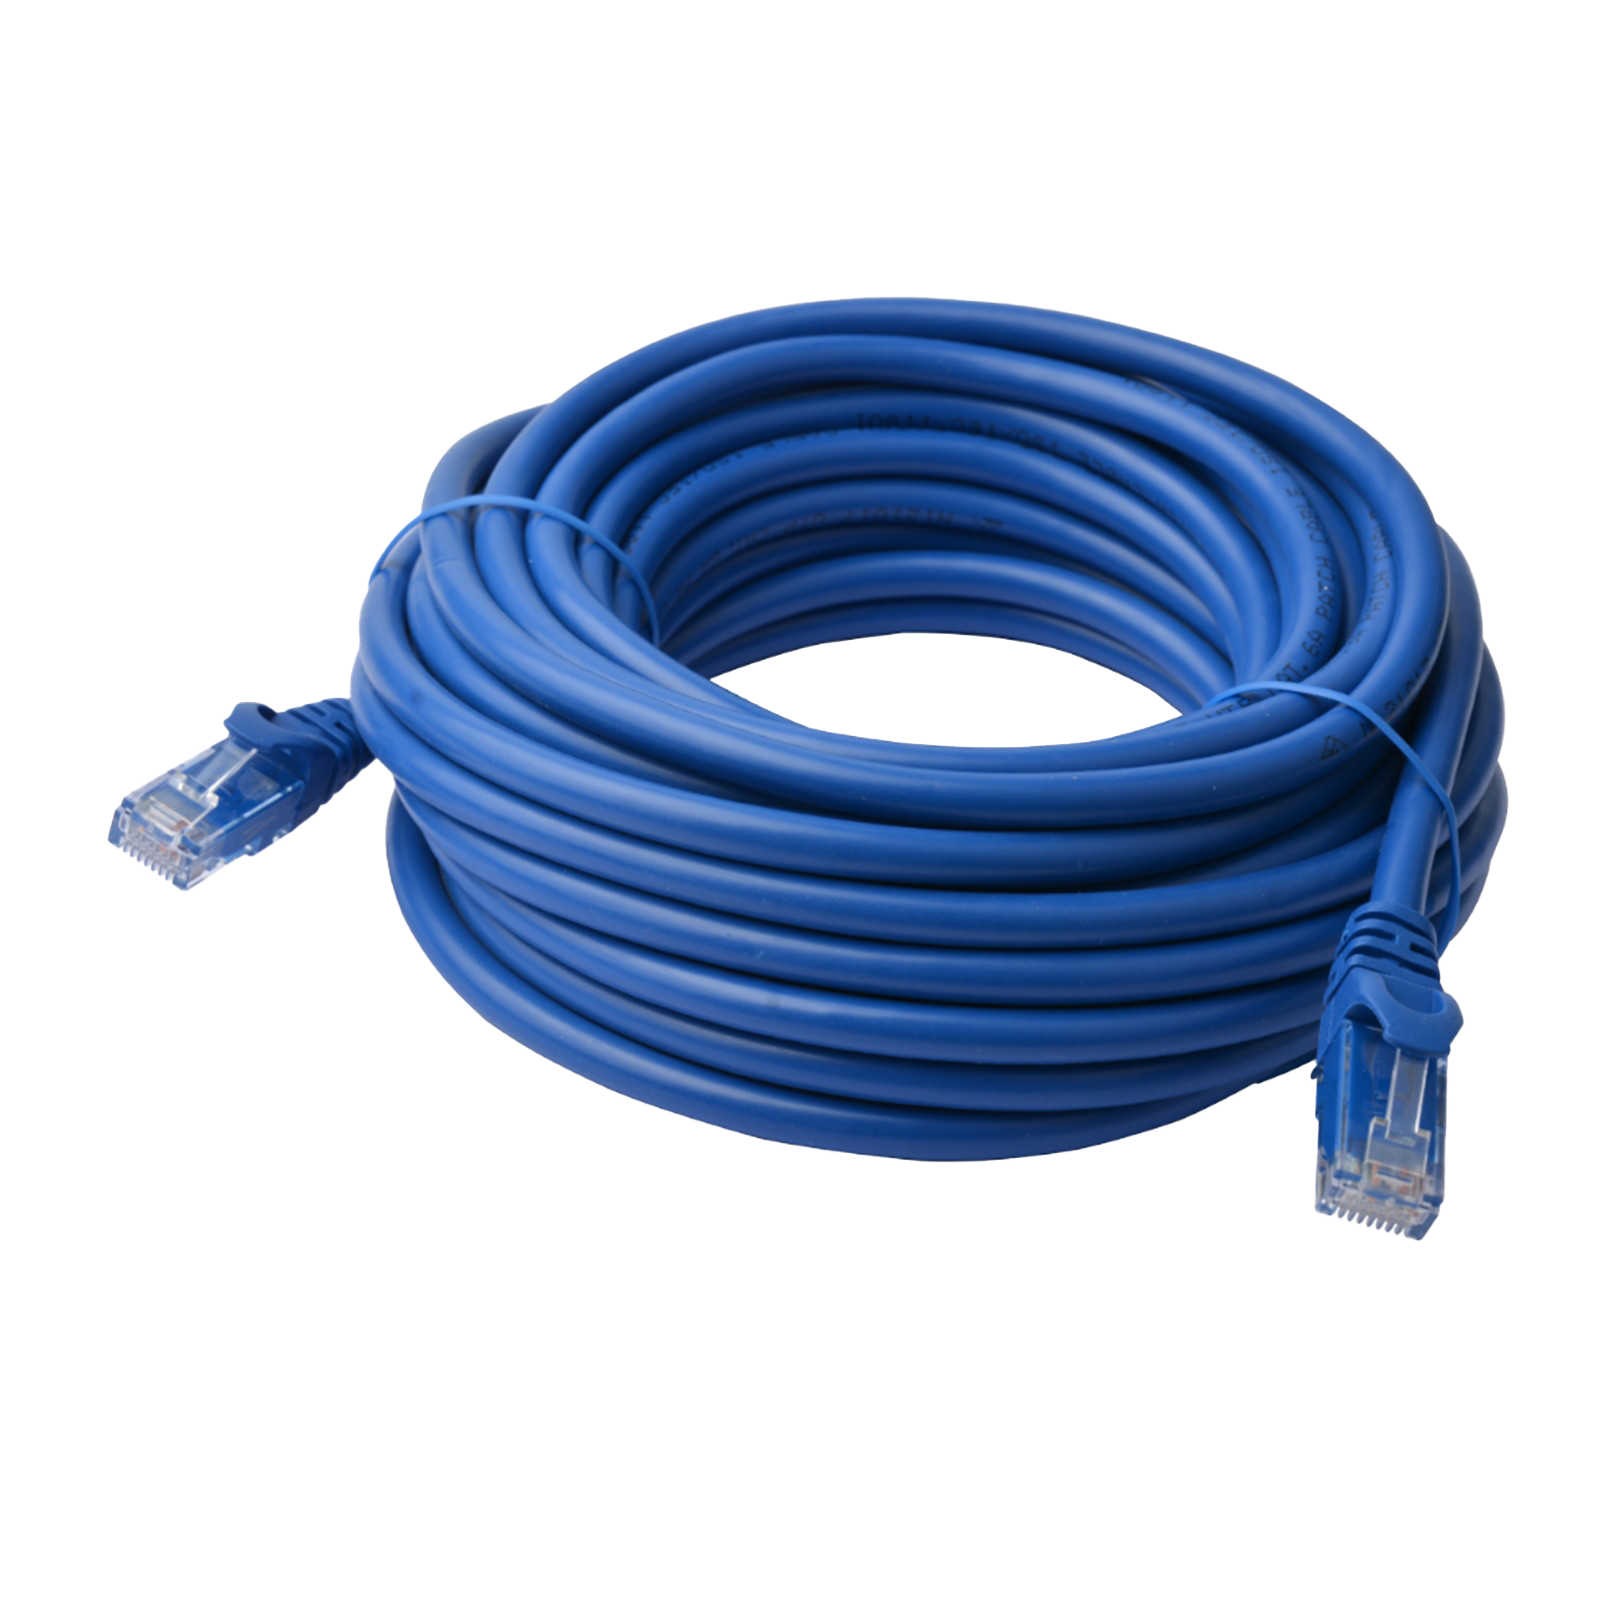 Blue Ethernet Cable PNG High-Quality Image